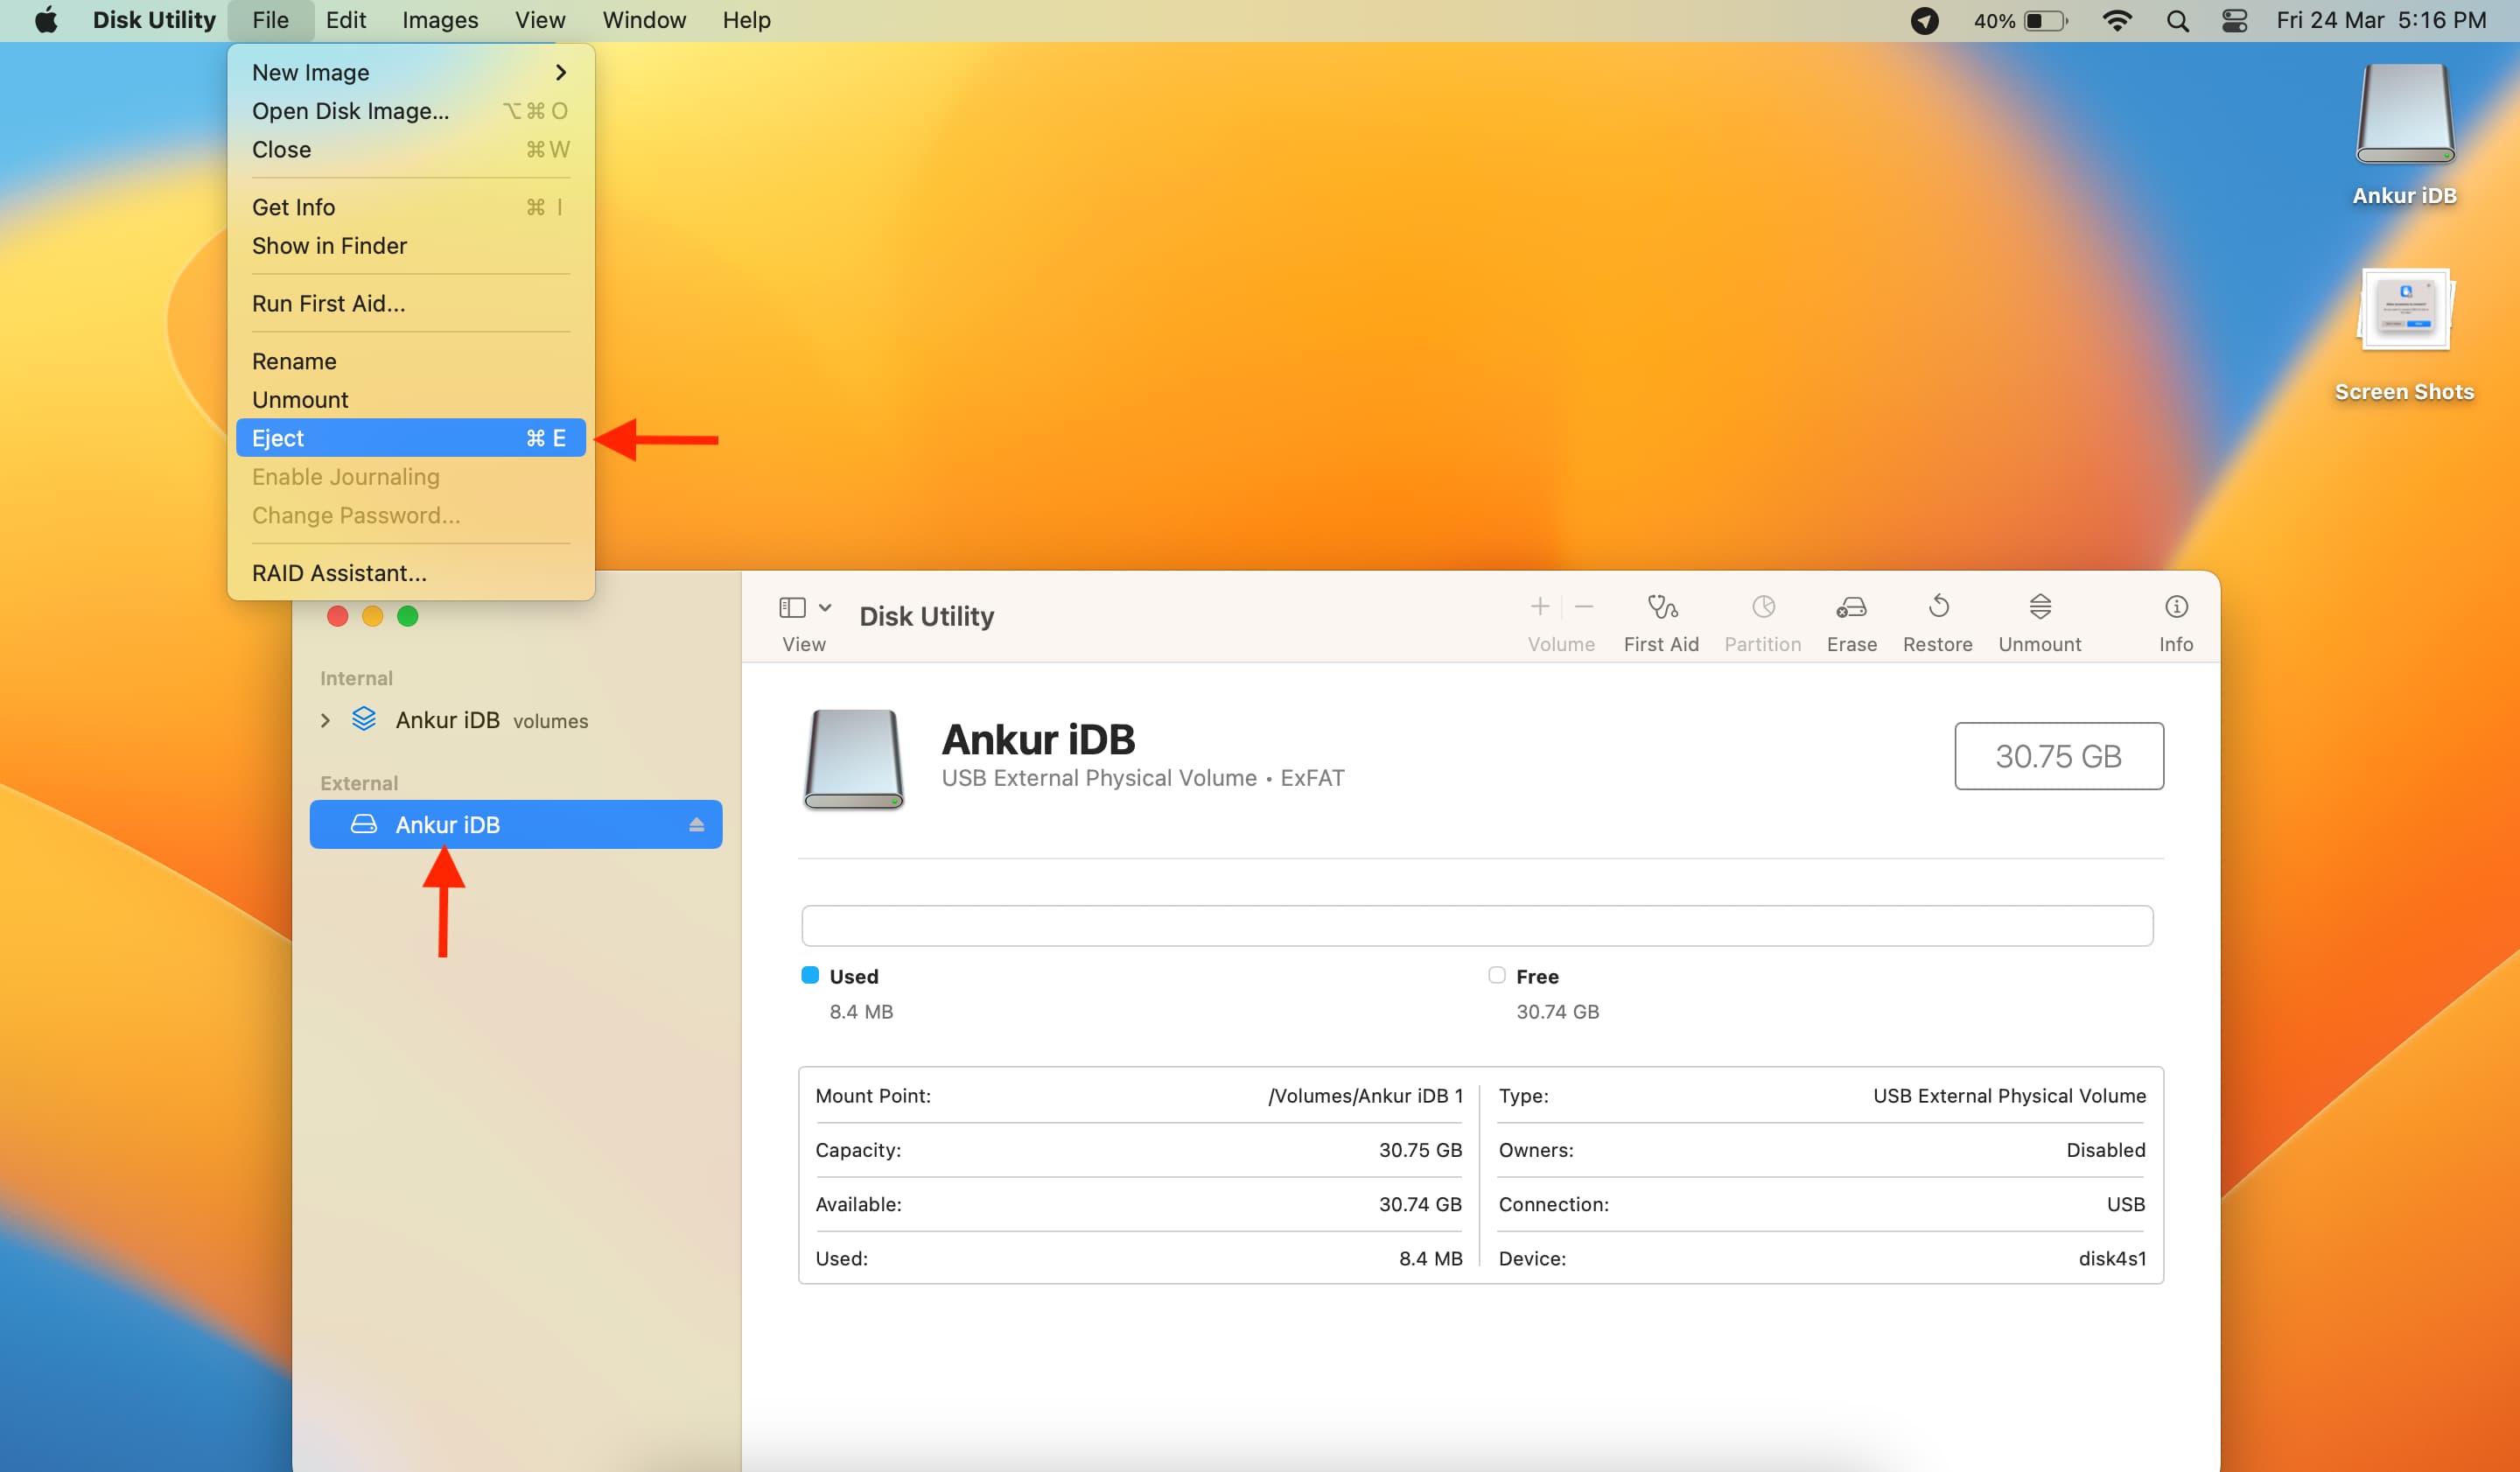 Eject drive from Disk Utility on Mac